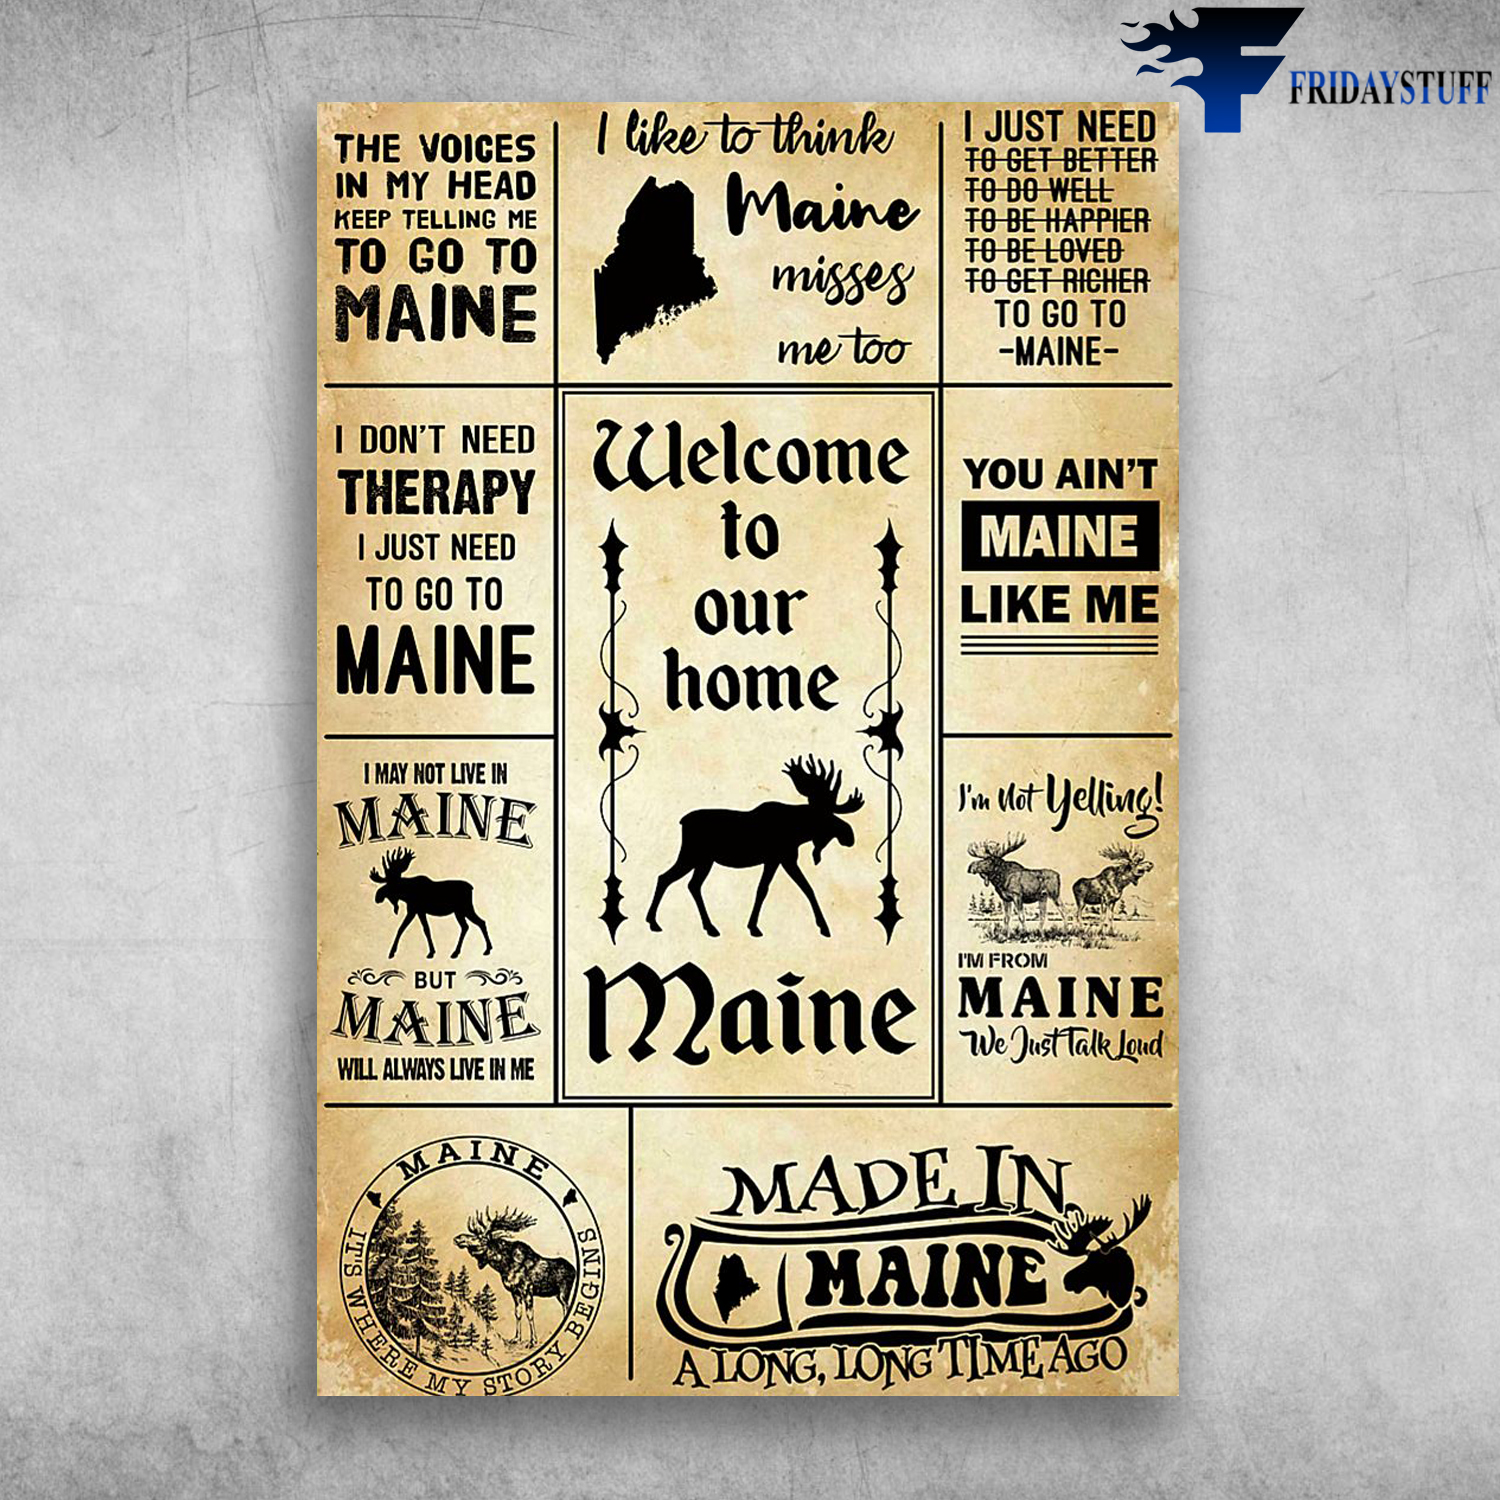 Welcome To Our Home Maine America Made In Maine A Long Long Time Ago